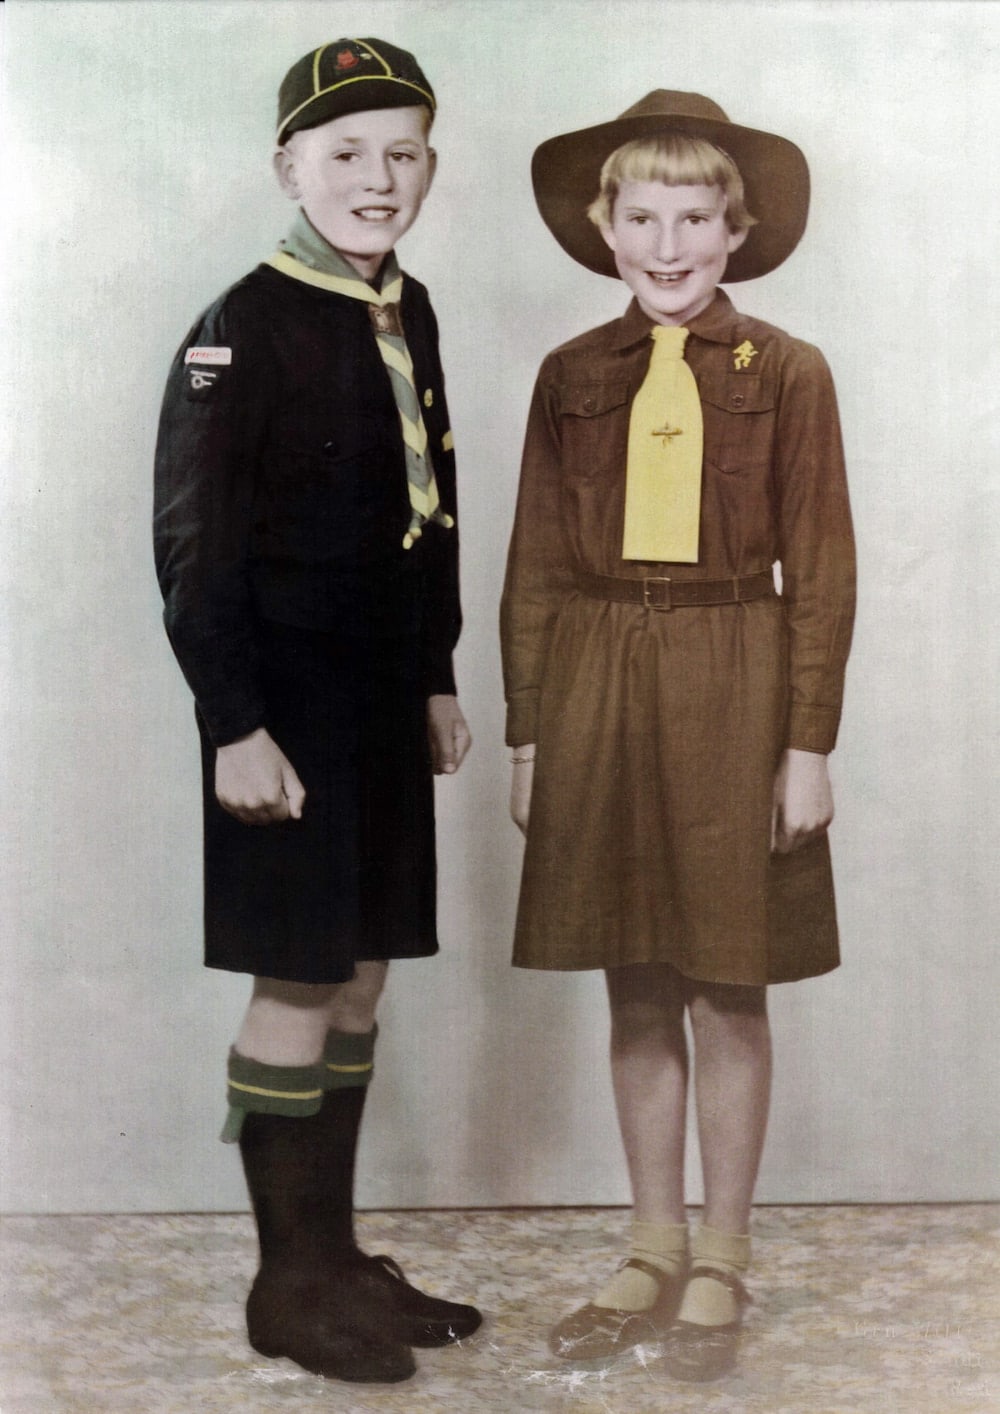 A Brownie (right) and Boy Scout (left) from mid-century Canberra. Photo provided.